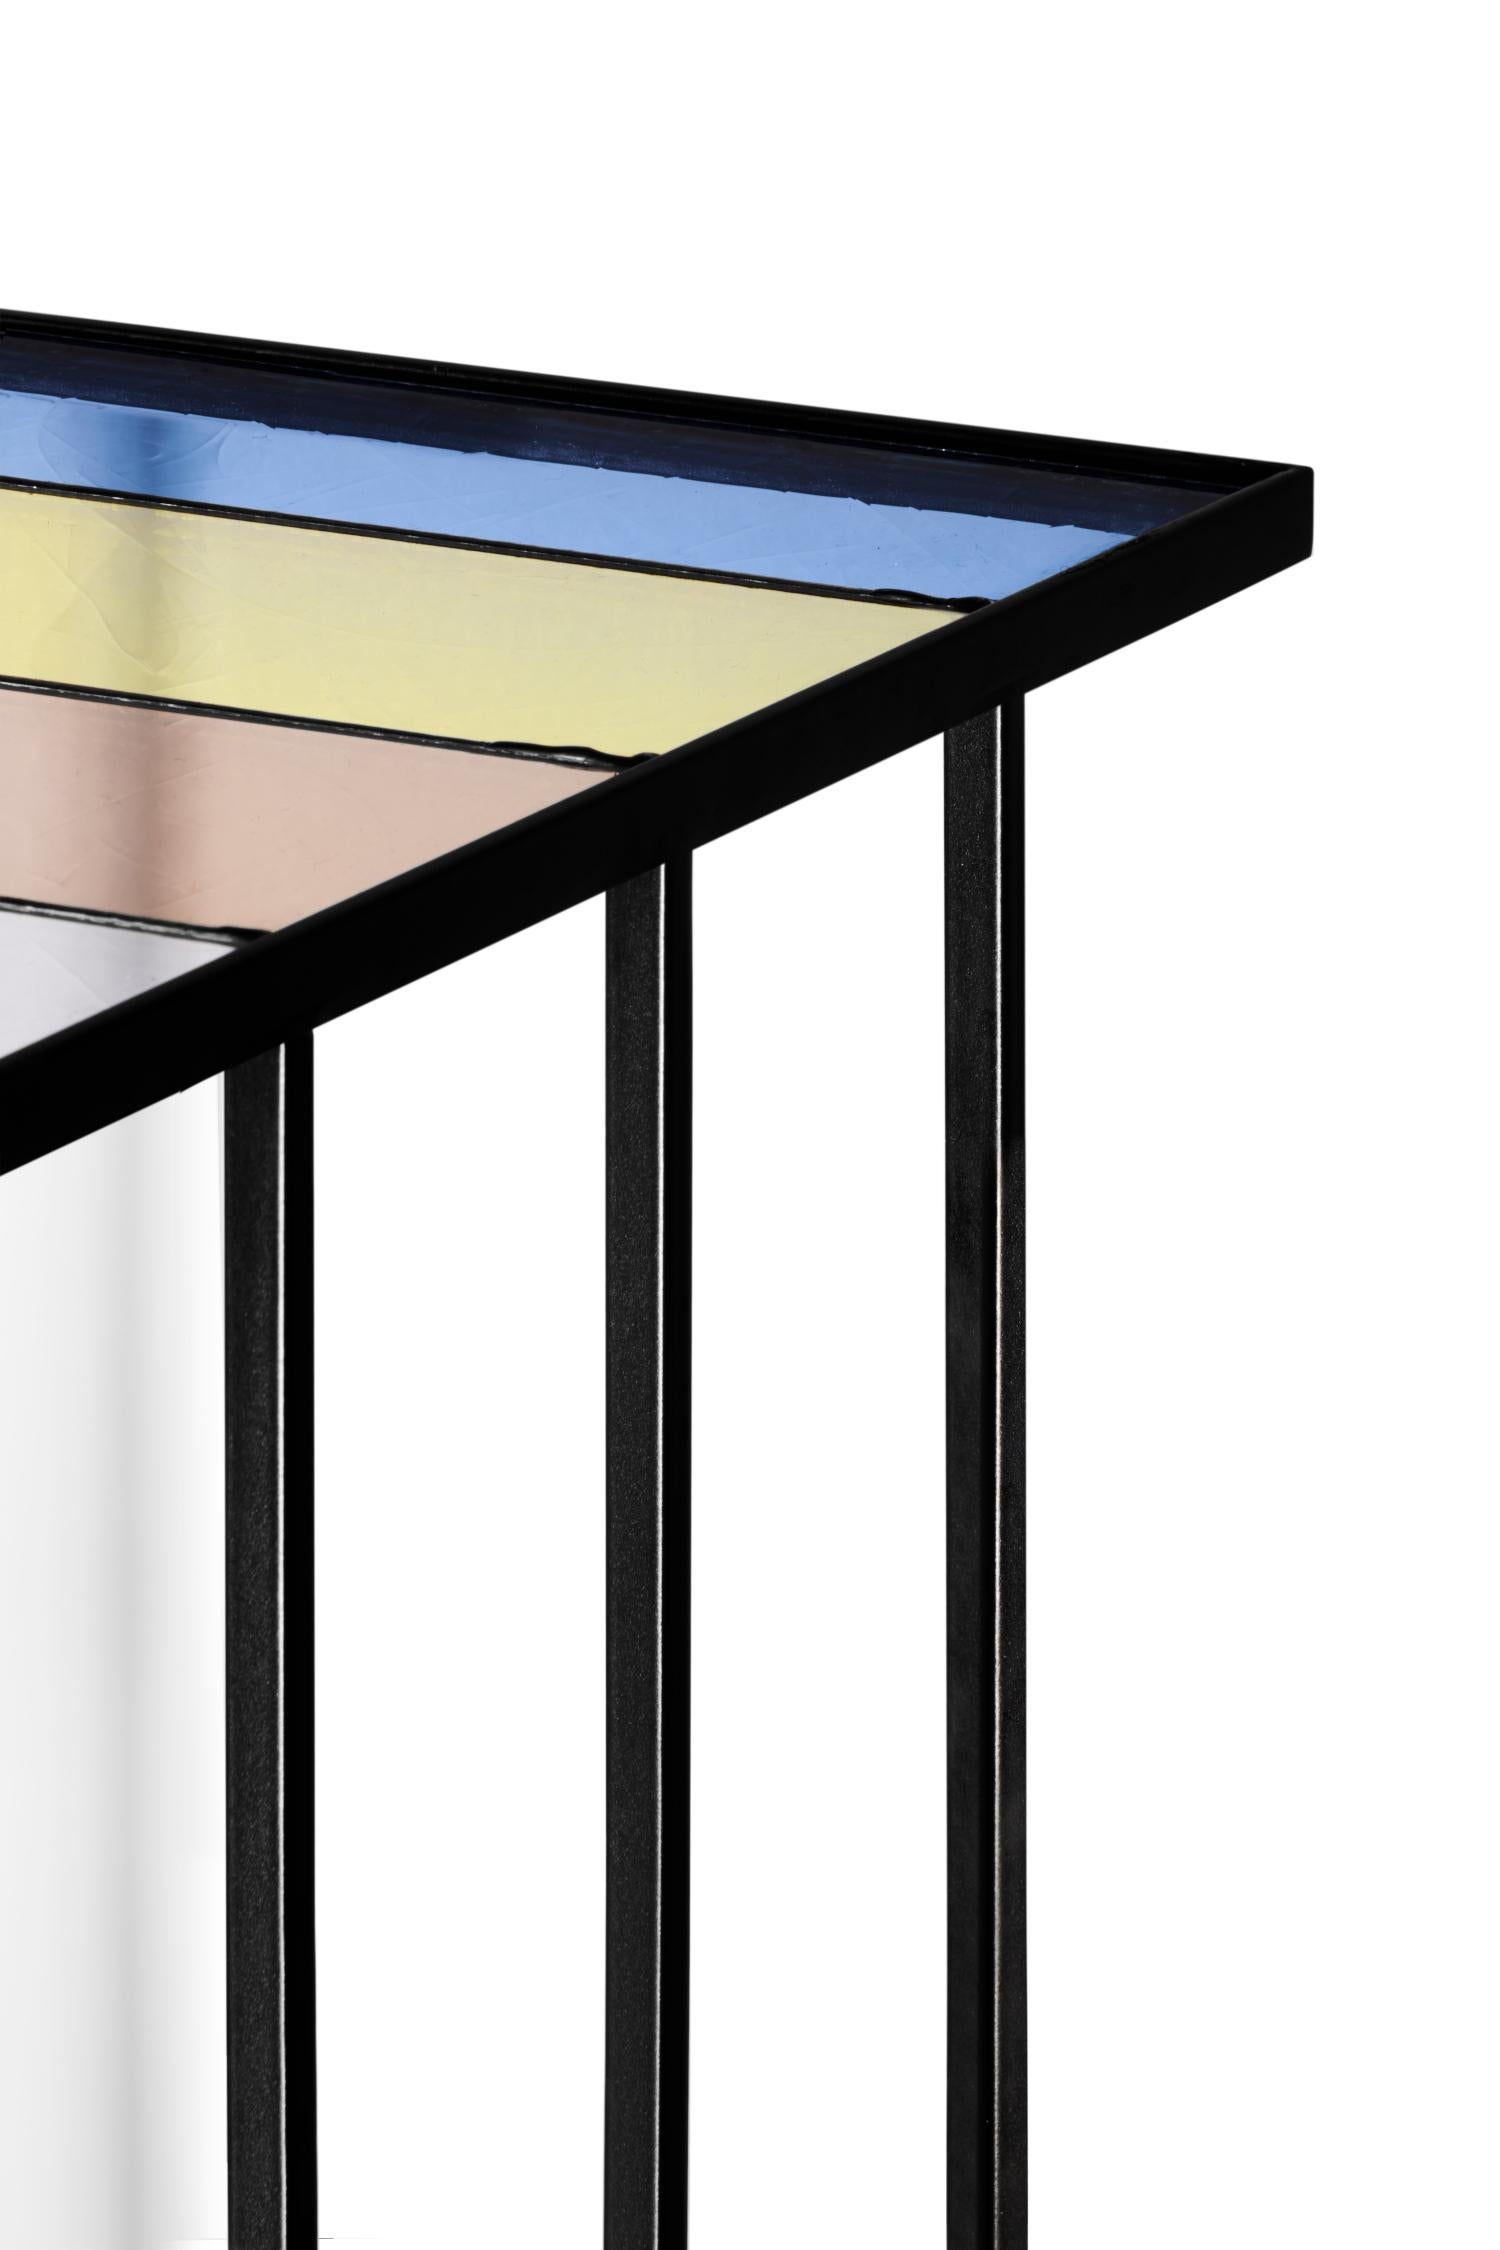 Modern Stained Glass Coffee Table, Santissimi i, Serena Confalonieri For Sale